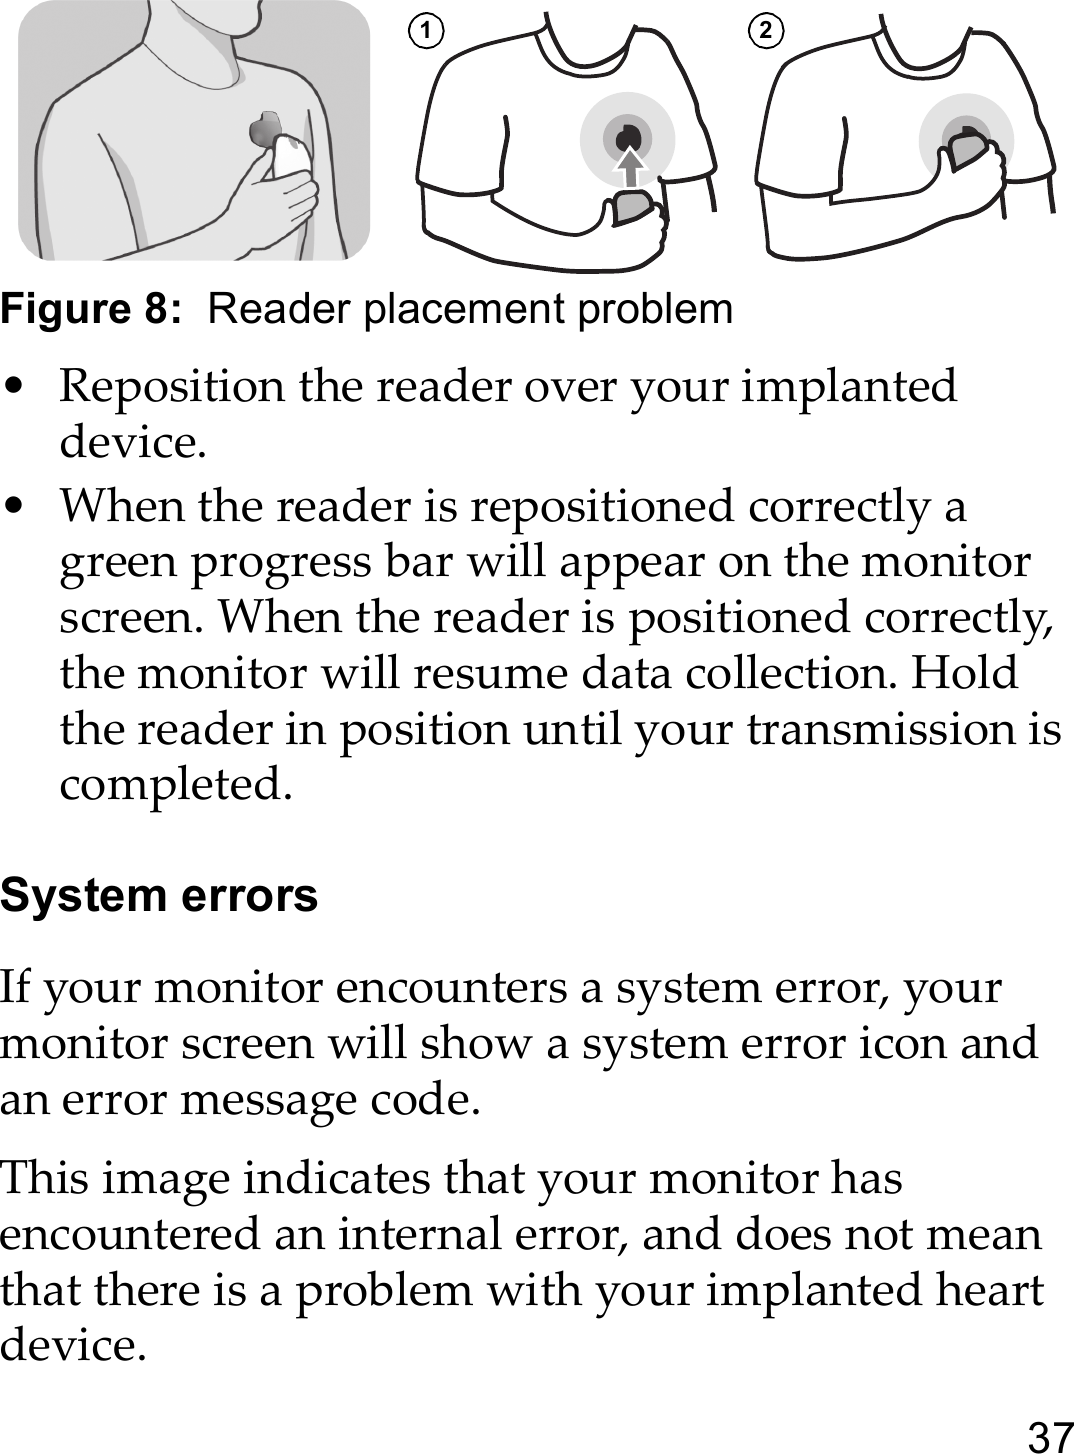 37Figure 8:  Reader placement problem • Reposition the reader over your implanted device. • When the reader is repositioned correctly a green progress bar will appear on the monitor screen. When the reader is positioned correctly, the monitor will resume data collection. Hold the reader in position until your transmission is completed.System errorsIf your monitor encounters a system error, your monitor screen will show a system error icon and an error message code.This image indicates that your monitor has encountered an internal error, and does not mean that there is a problem with your implanted heart device.1 2